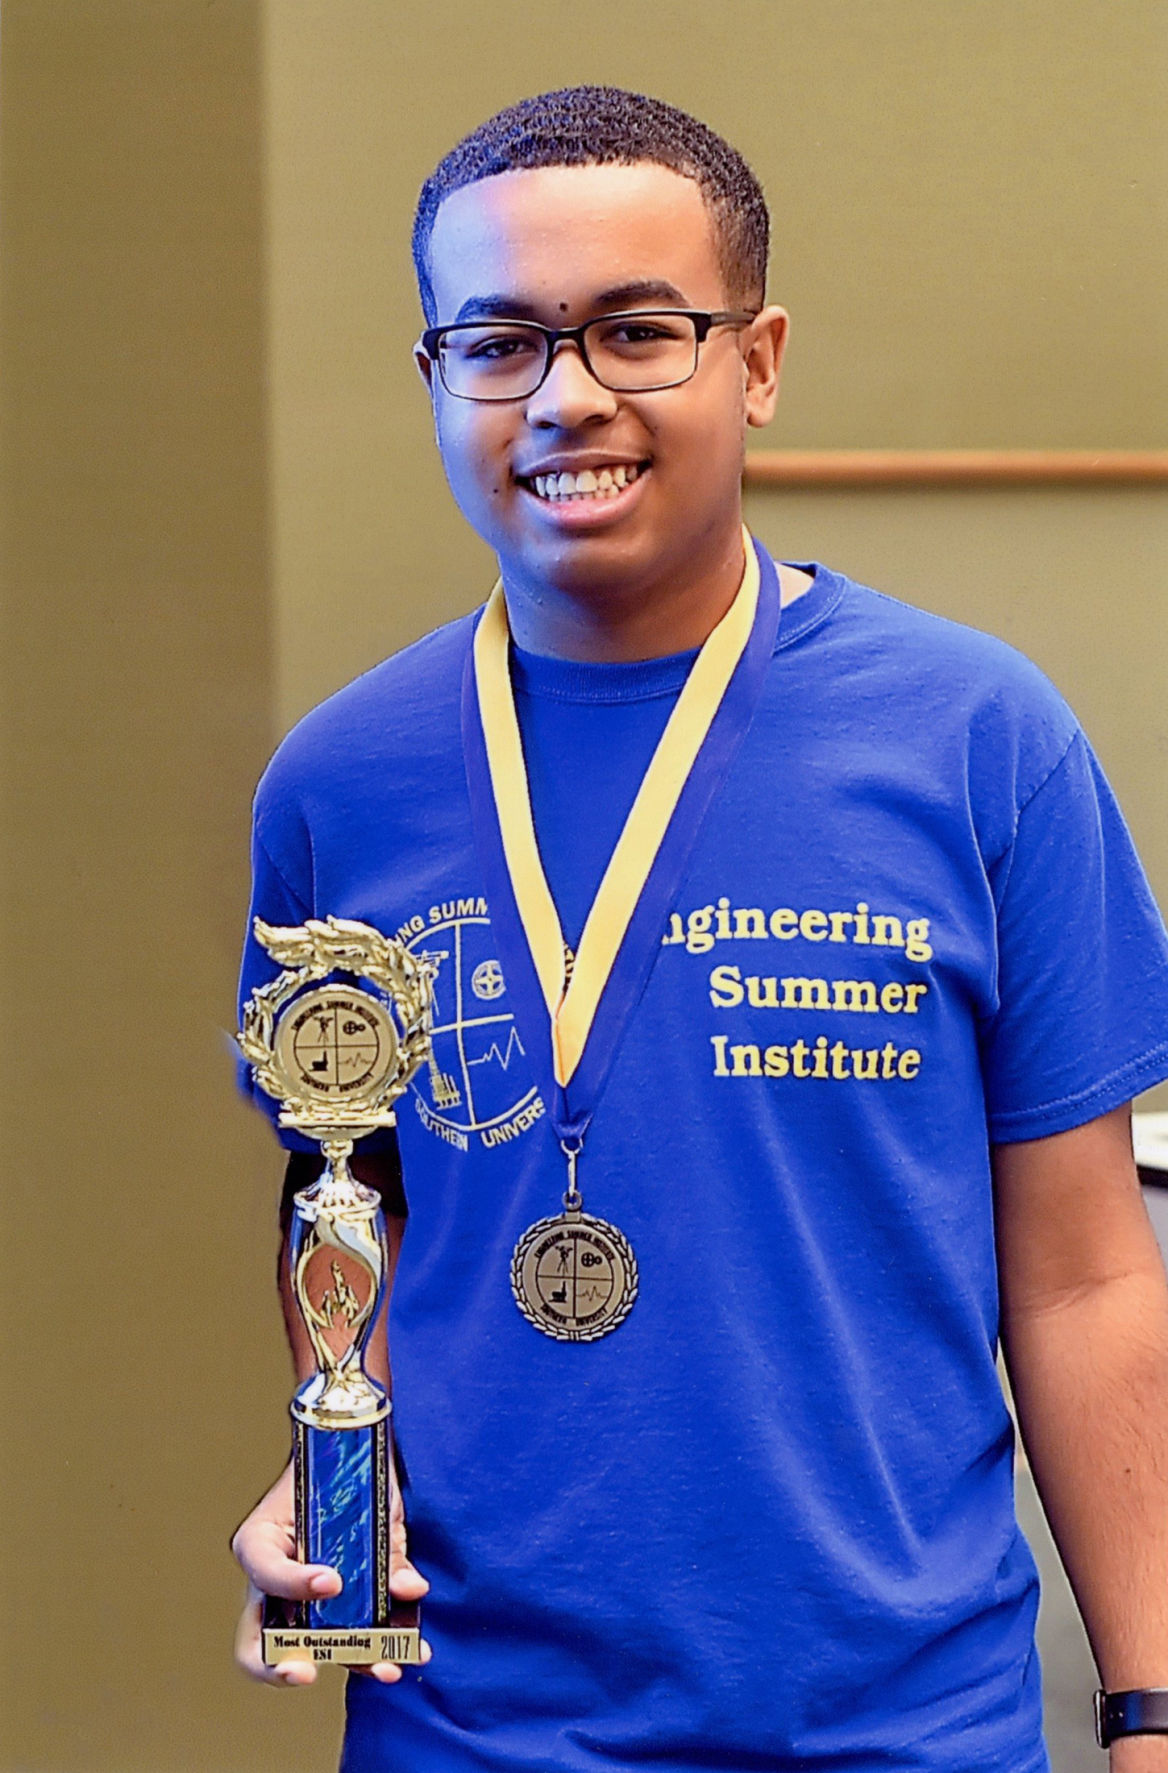 Zachary students shine at Southern&#39;s Engineering Summer Institute | Zachary | 0